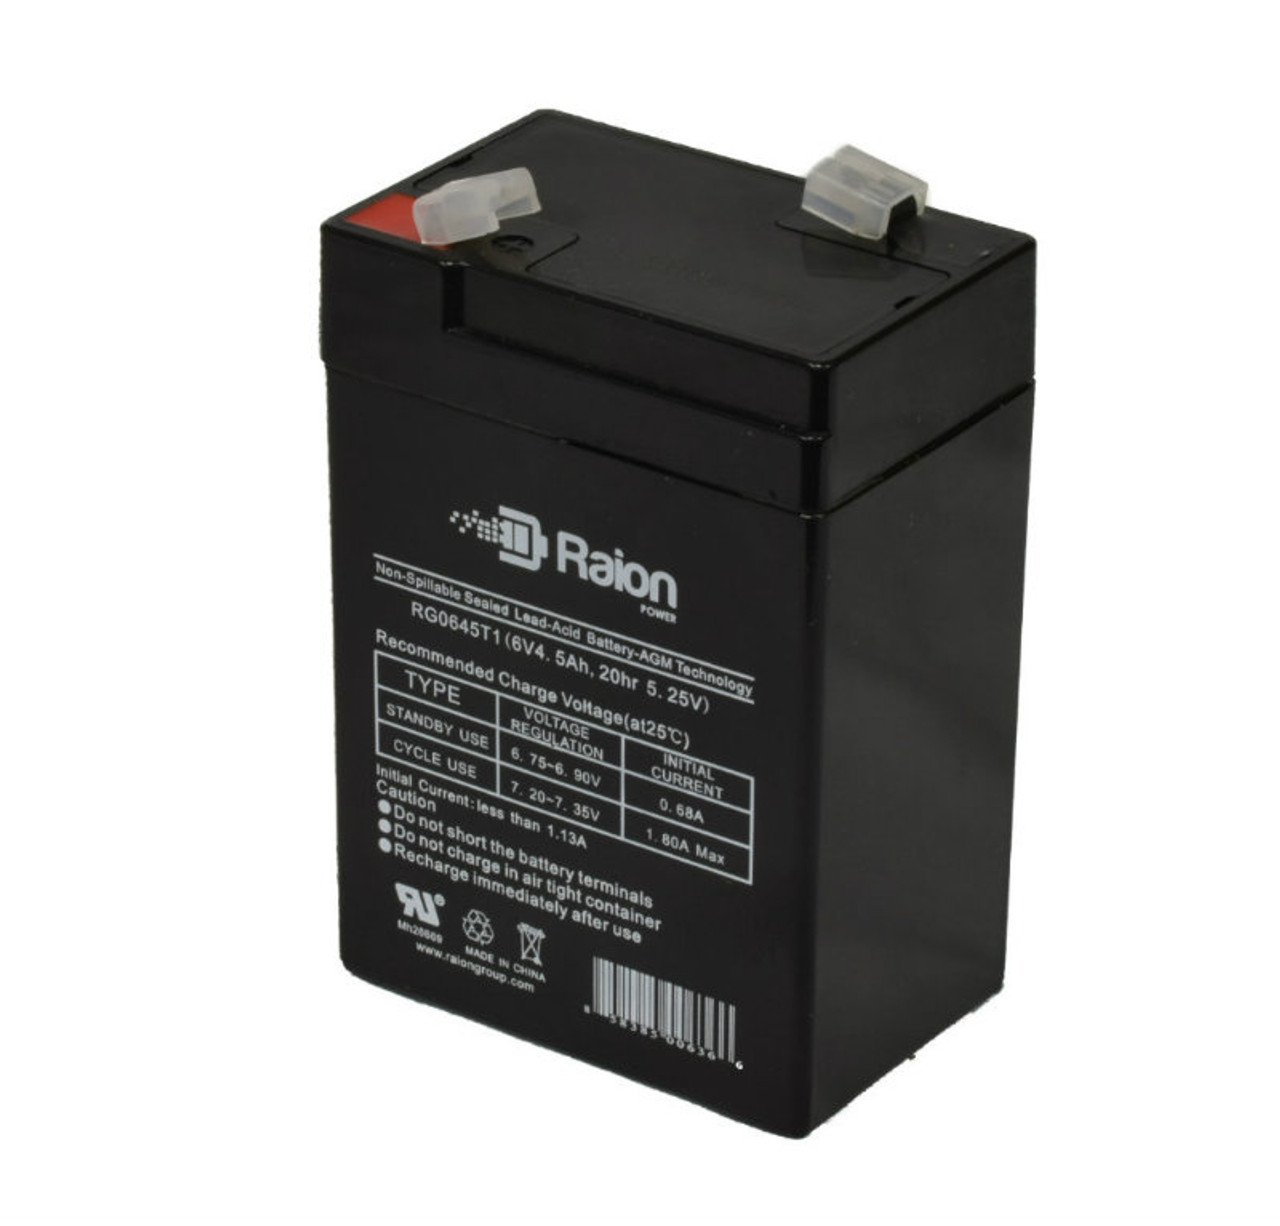 Raion Power RG0645T1 6V 4.5Ah Replacement Battery Cartridge for New Power NS6-4.5